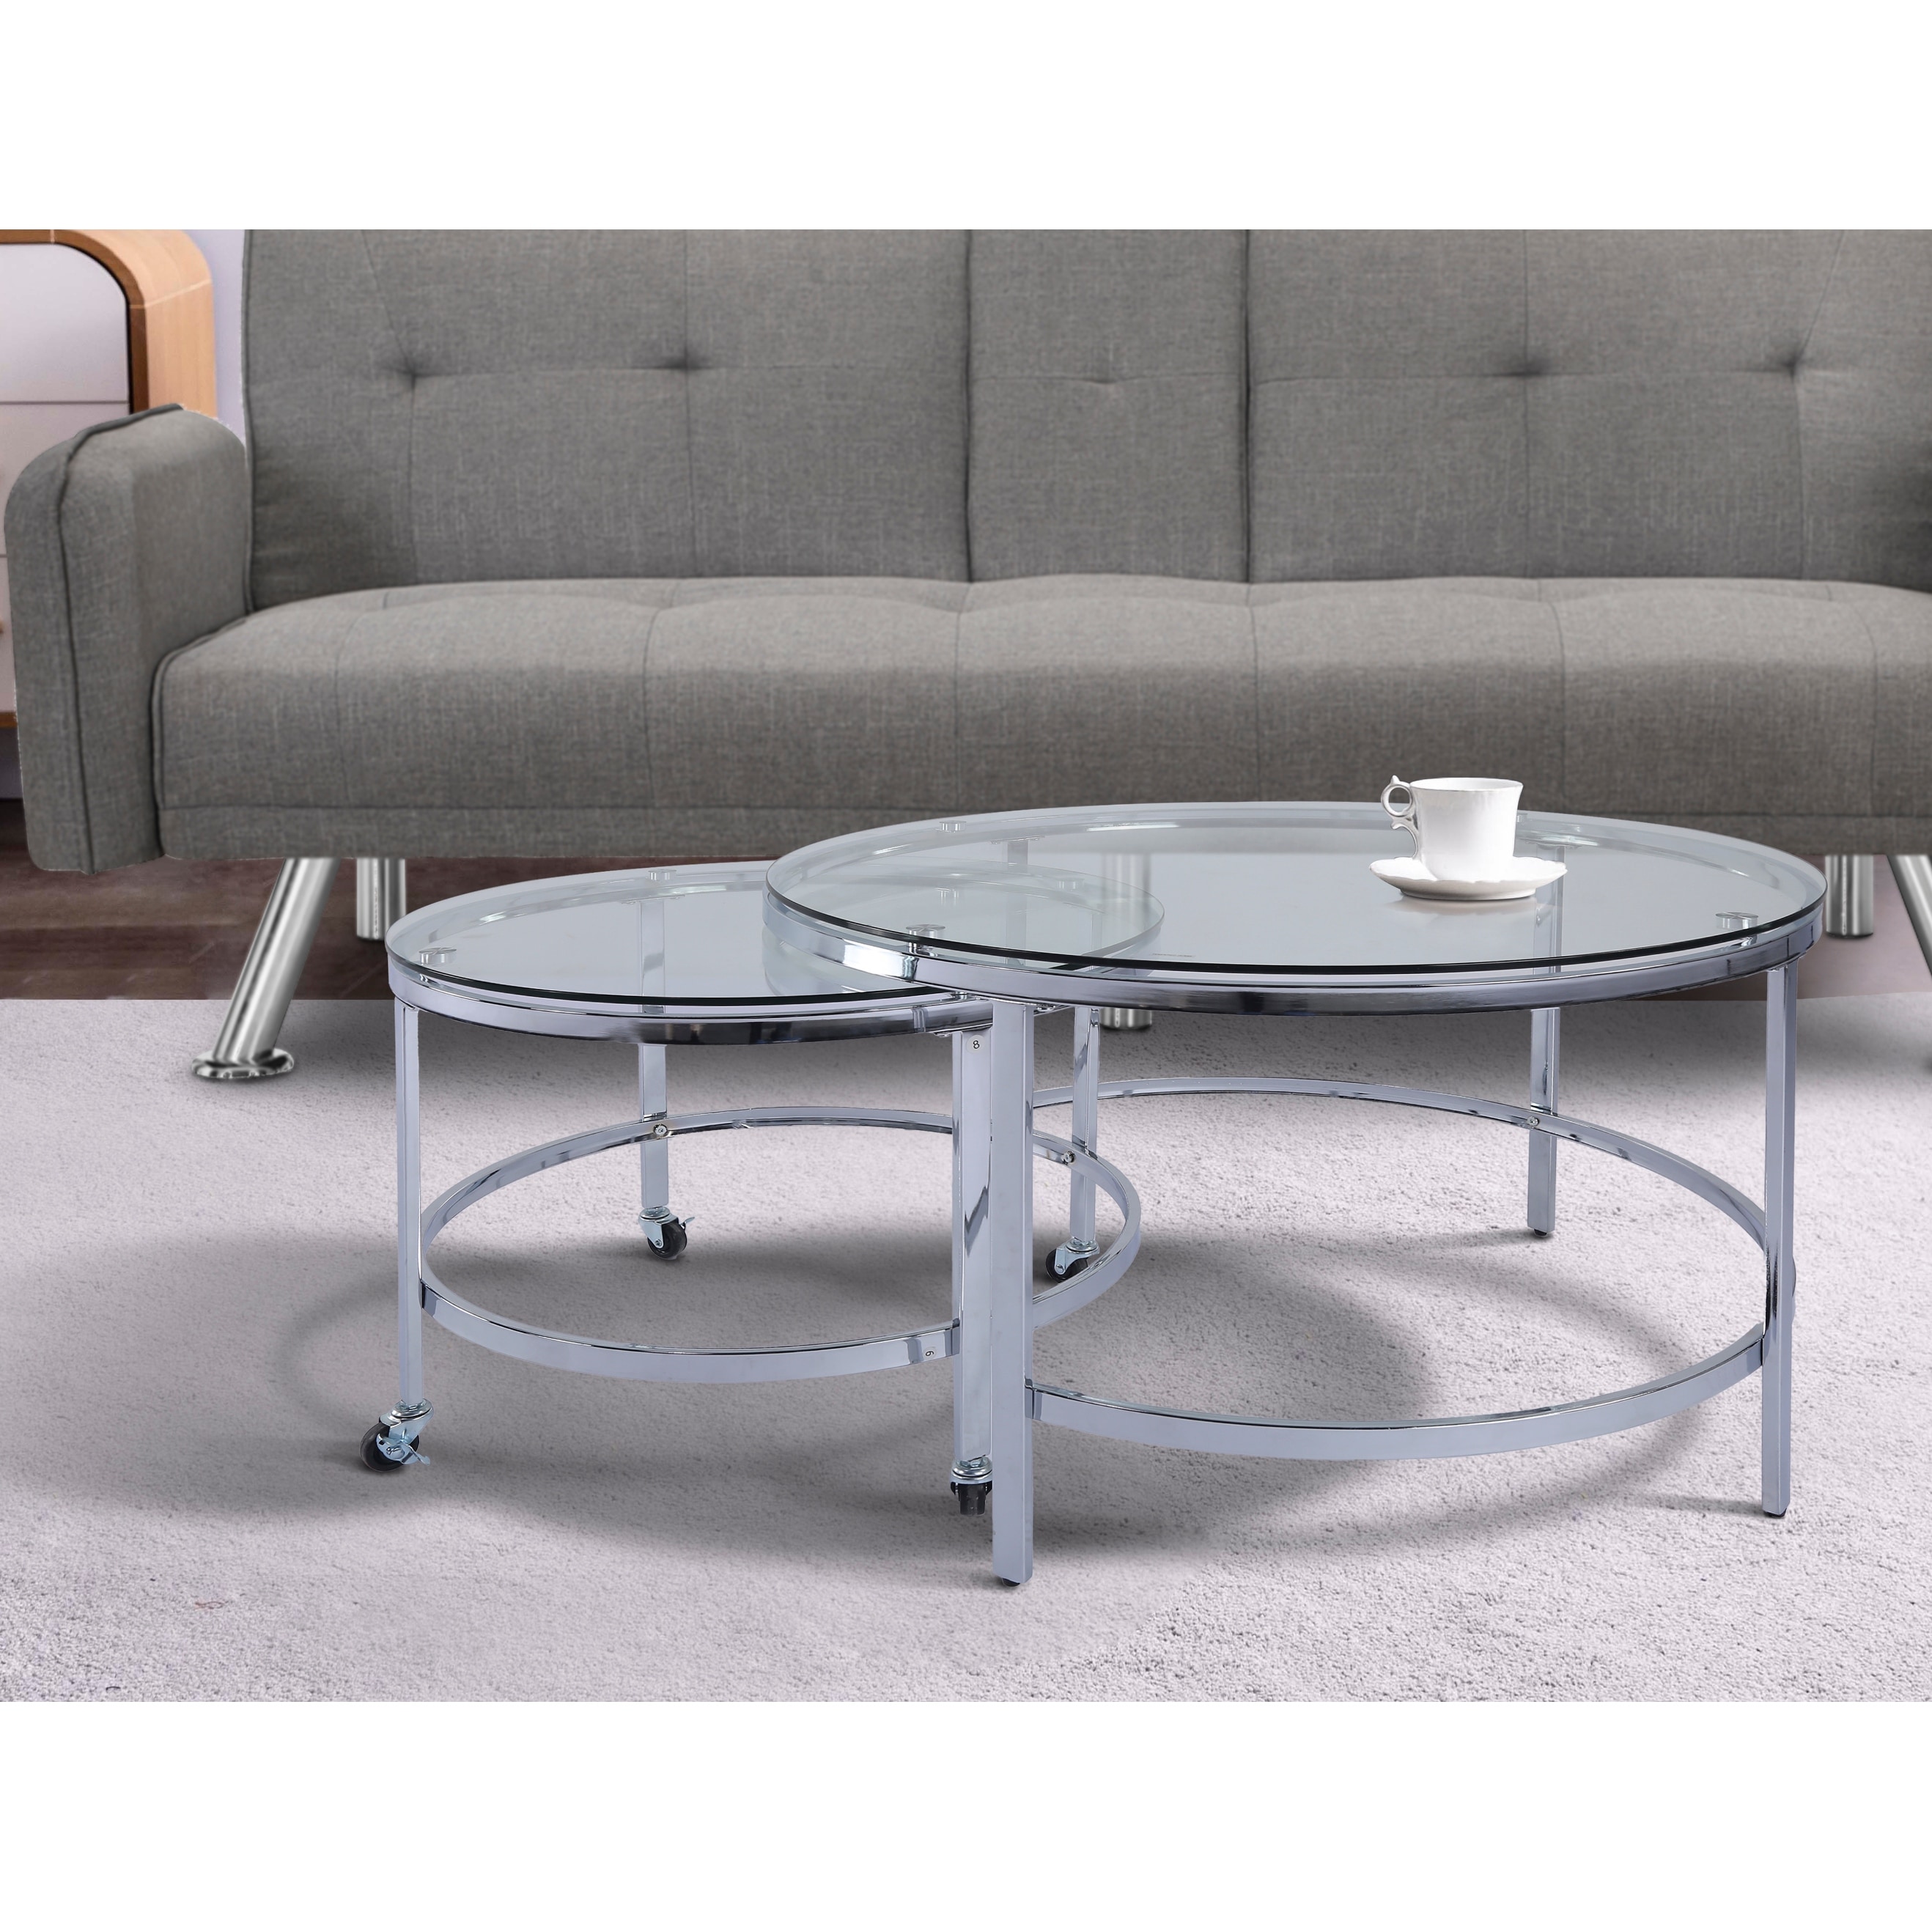 Modern Glass Nesting Table Set,transparent / Sliver,coffee, Console, Sofa & End Tables